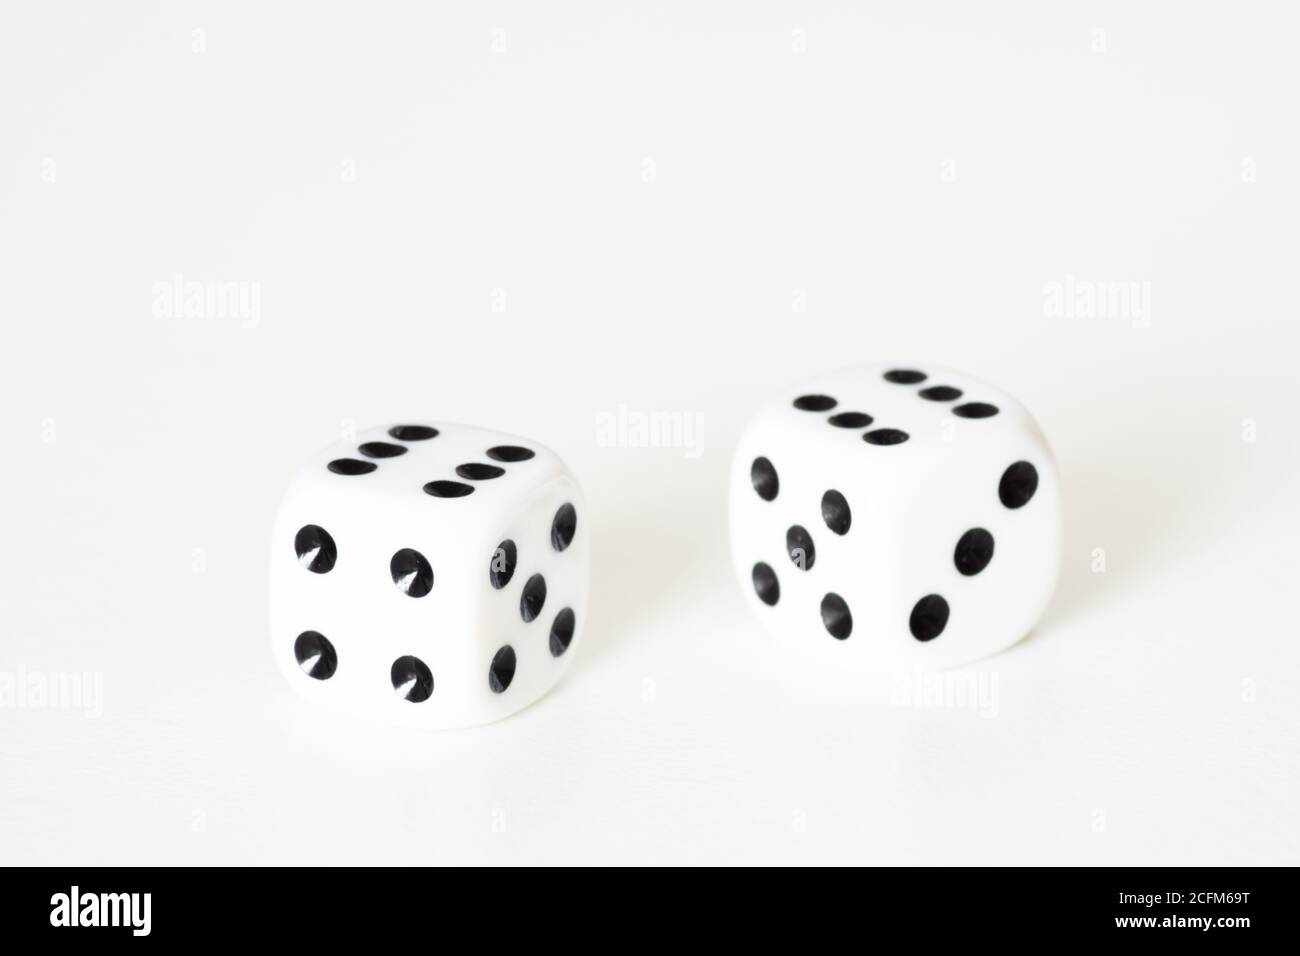 Traditional dice or die against white background. Luck, lucky, roll of the dice, luck of the draw, take a chance, Stock Photo